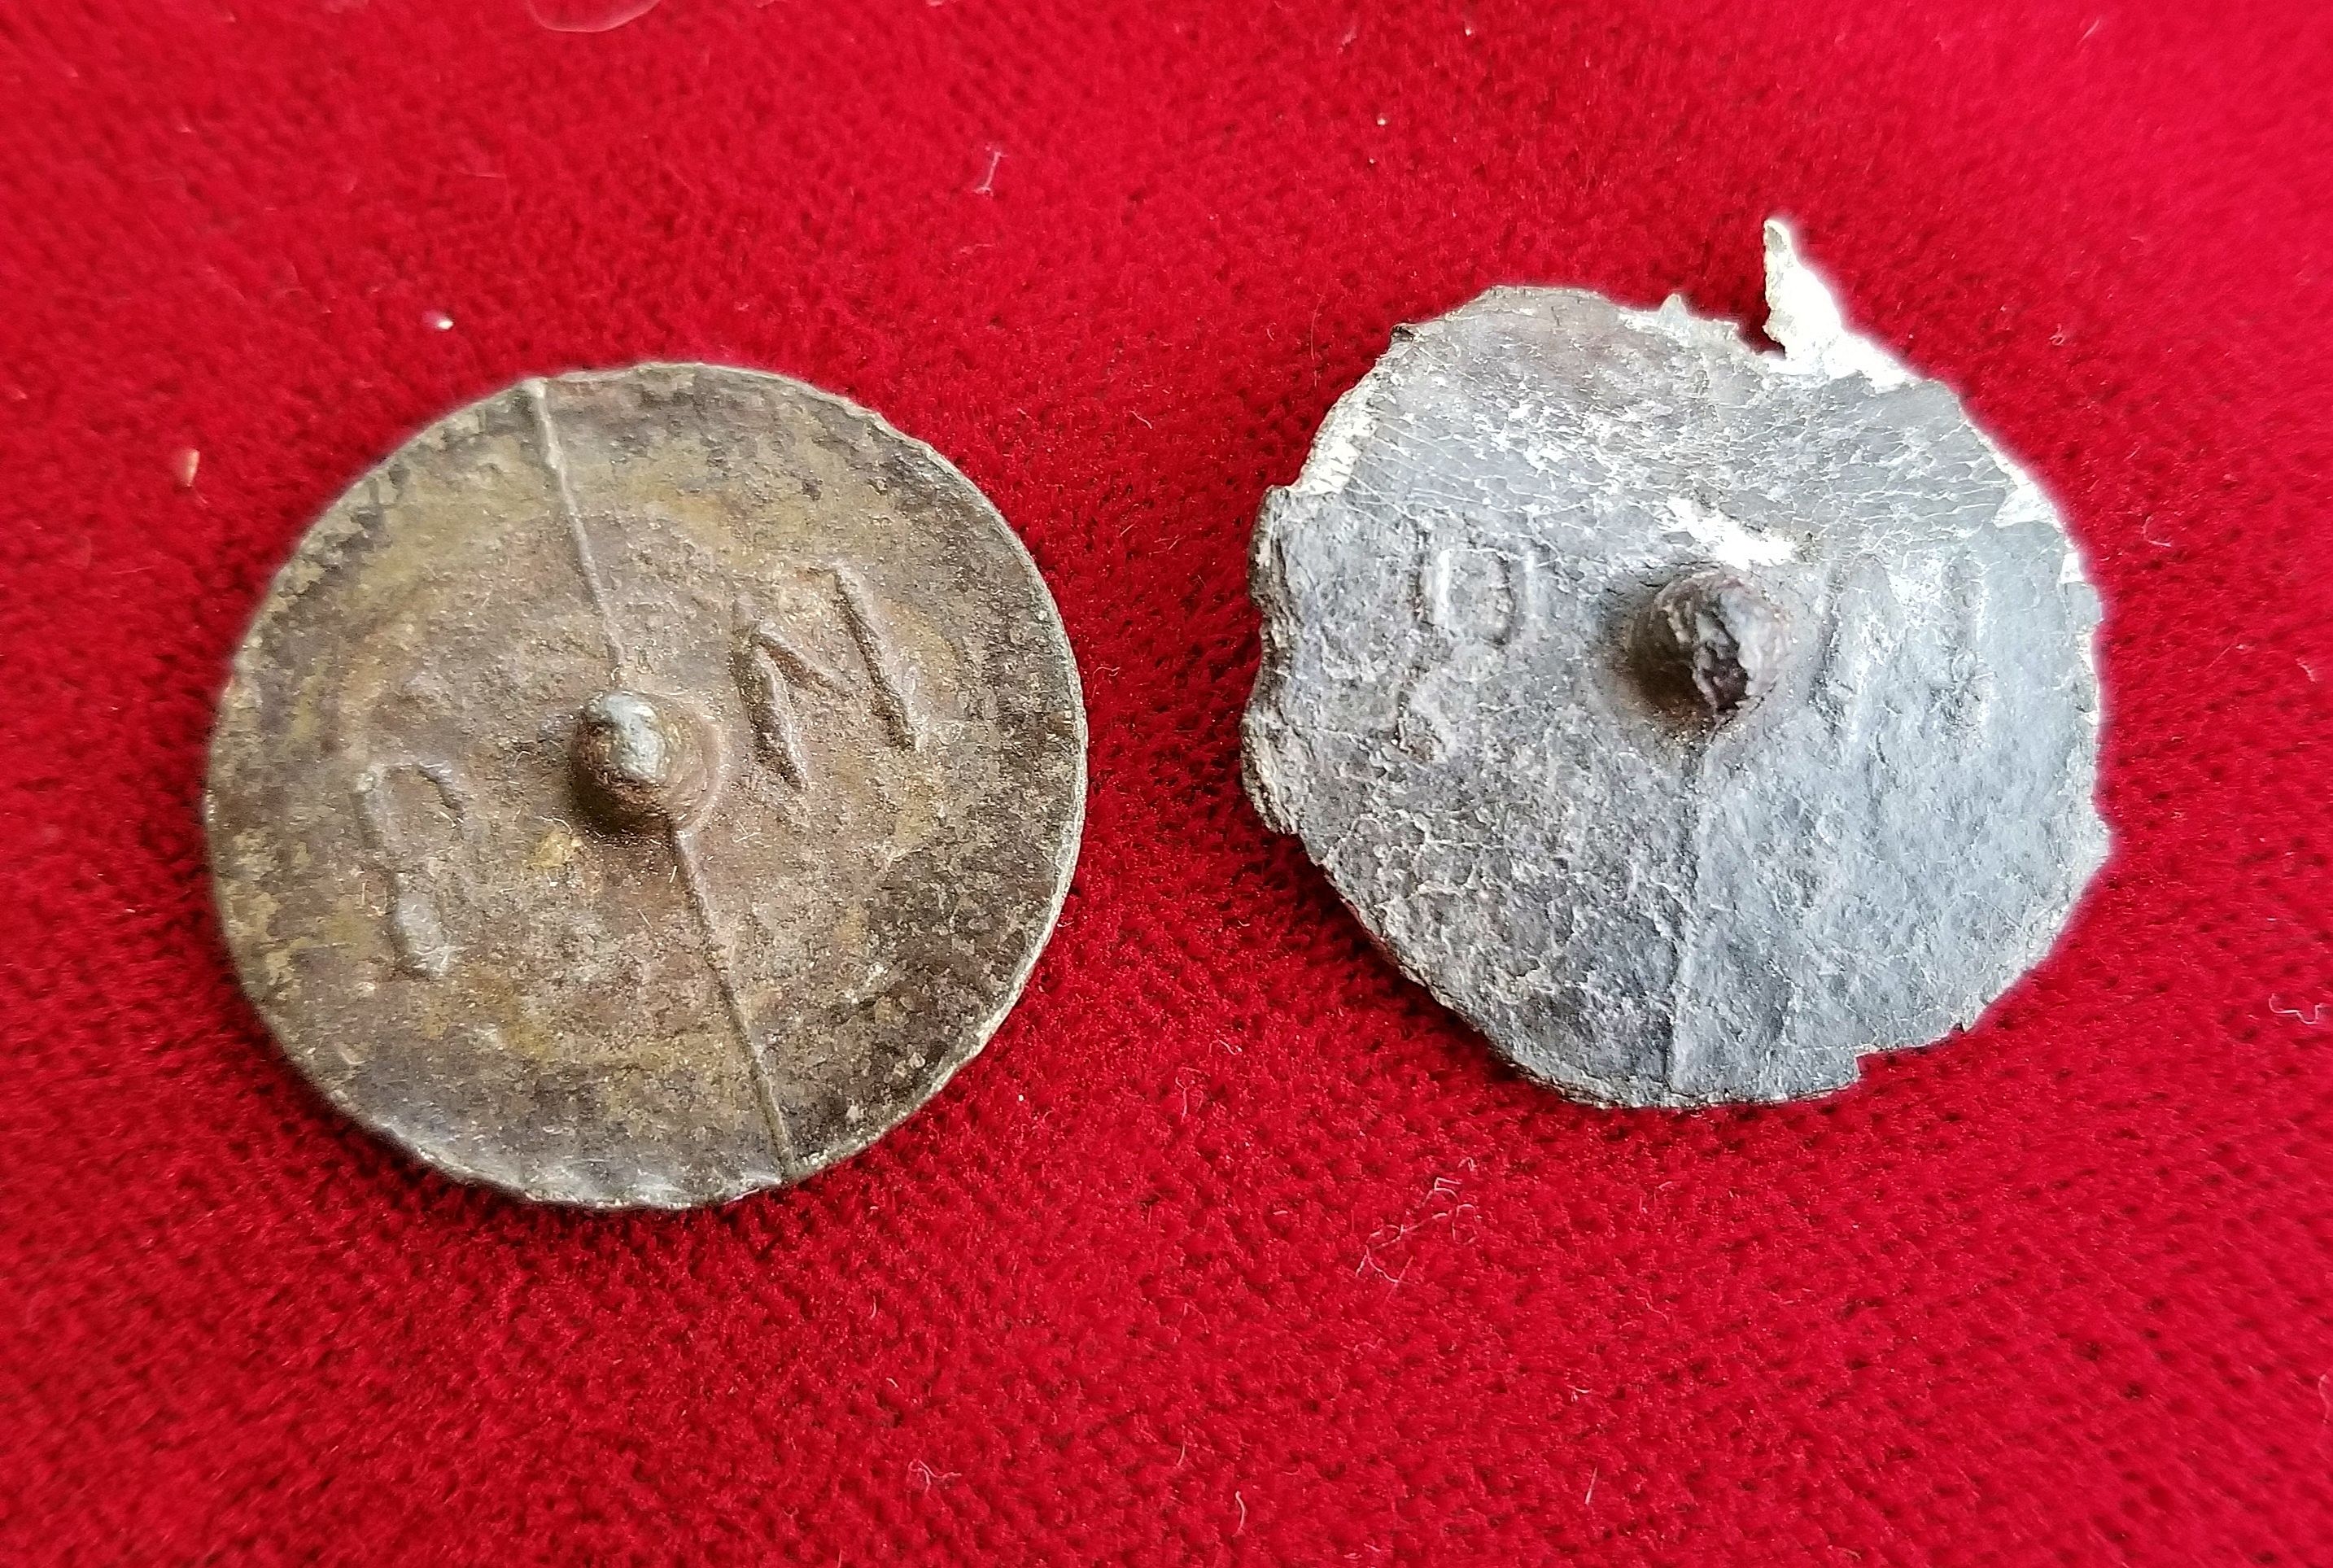 Two pewter coat buttons with raised letters "PN" on the back.  These were likely worn by American troops during the Revolutionary War.